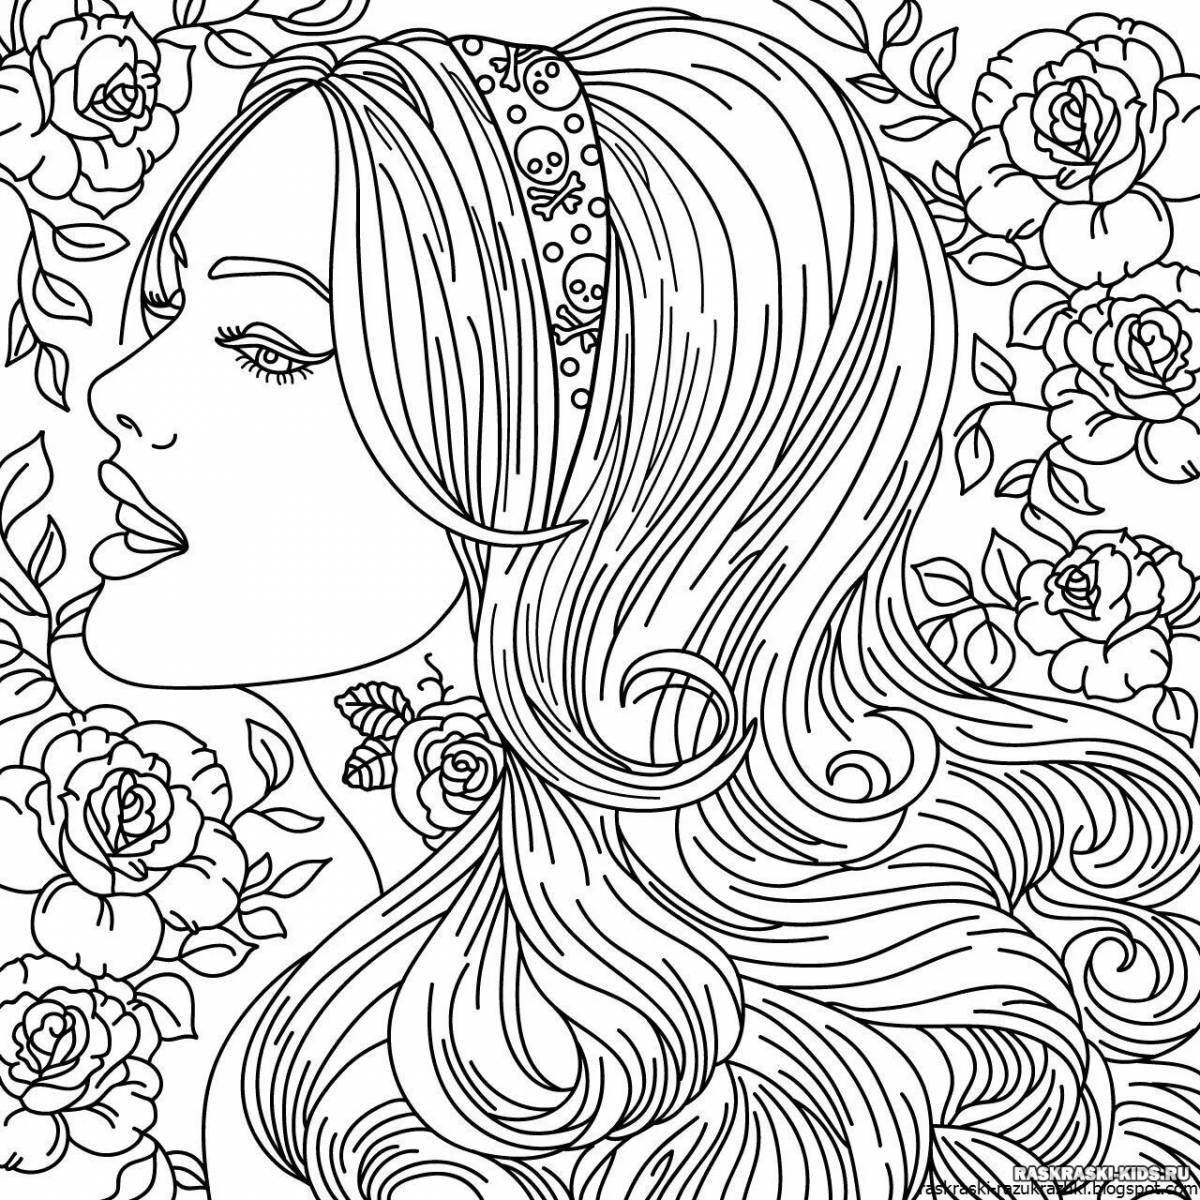 Heavy coloring book for girls